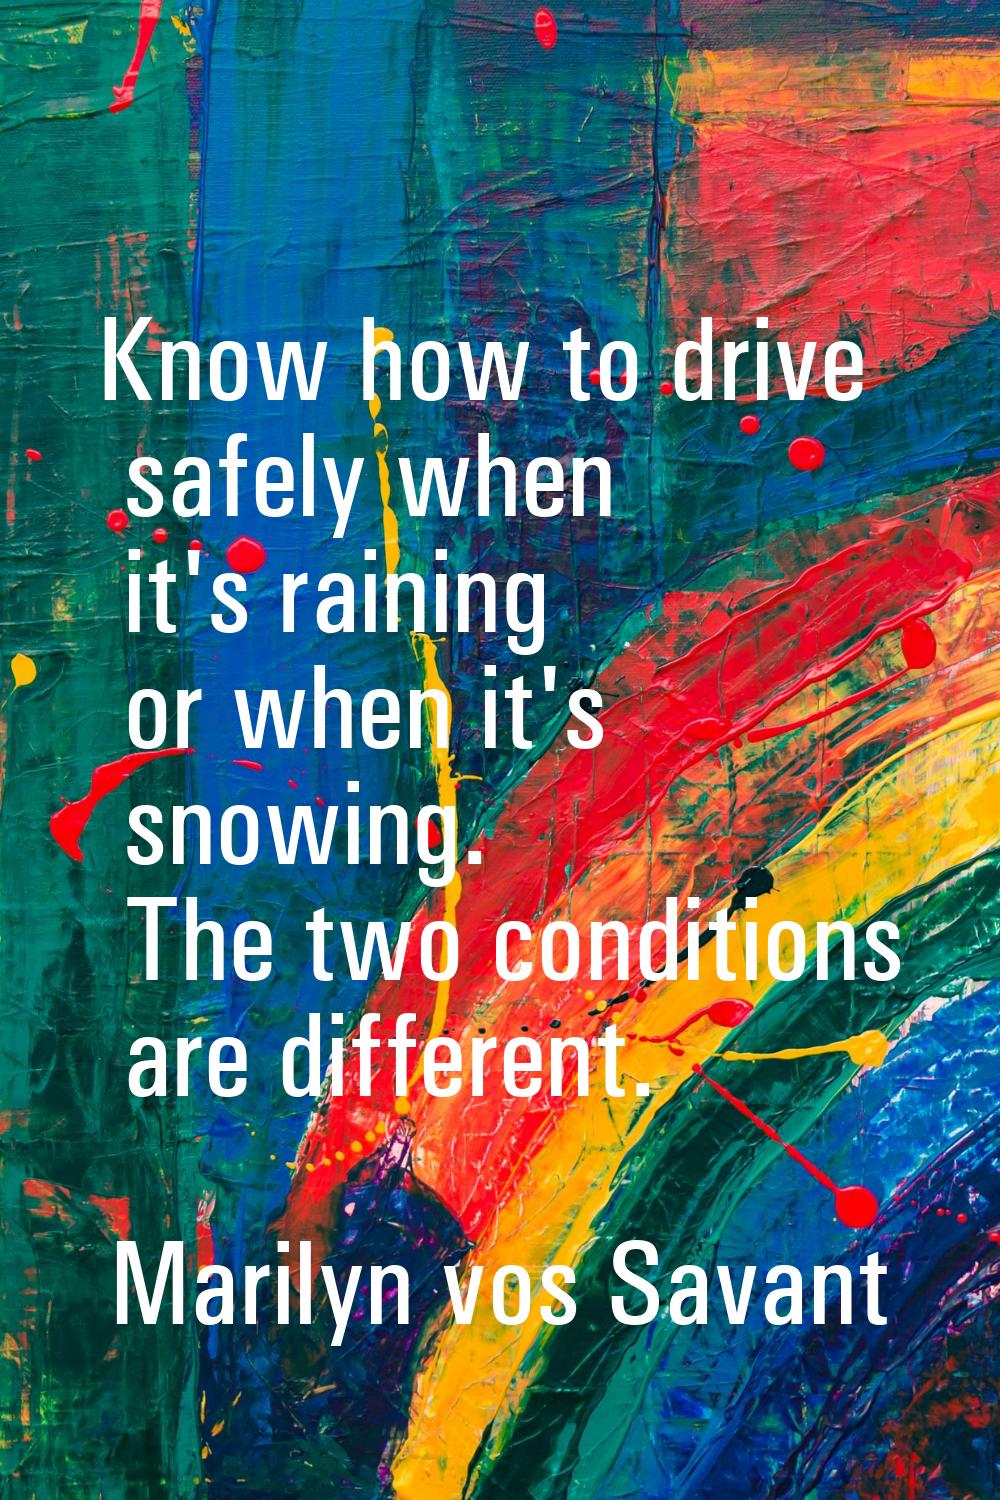 Know how to drive safely when it's raining or when it's snowing. The two conditions are different.